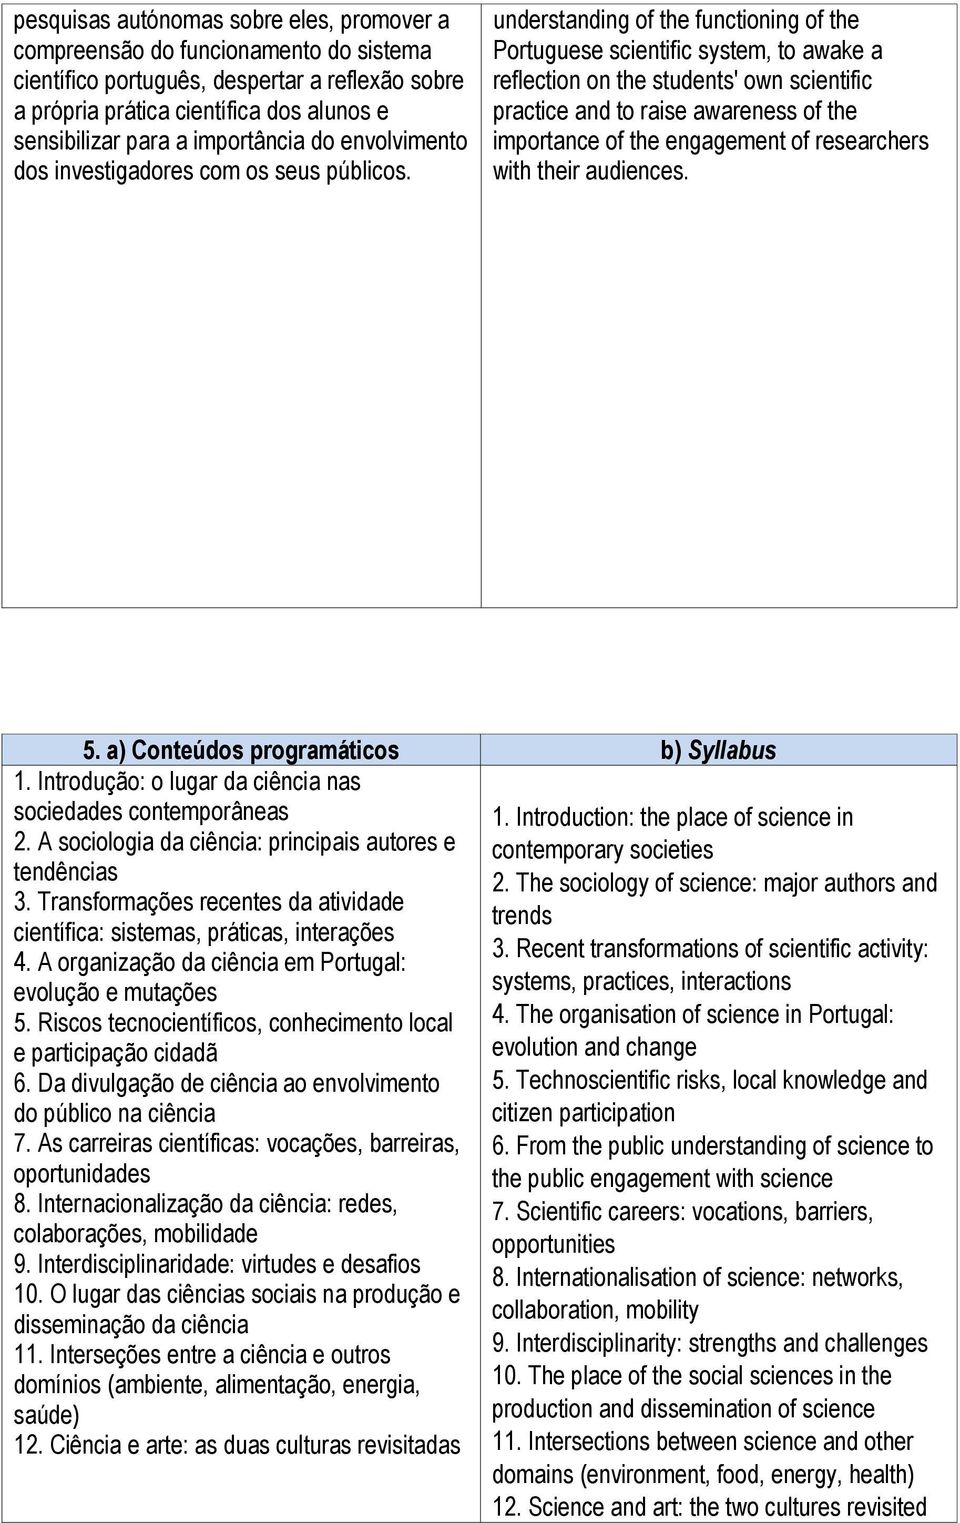 understanding of the functioning of the Portuguese scientific system, to awake a reflection on the students' own scientific practice and to raise awareness of the importance of the engagement of